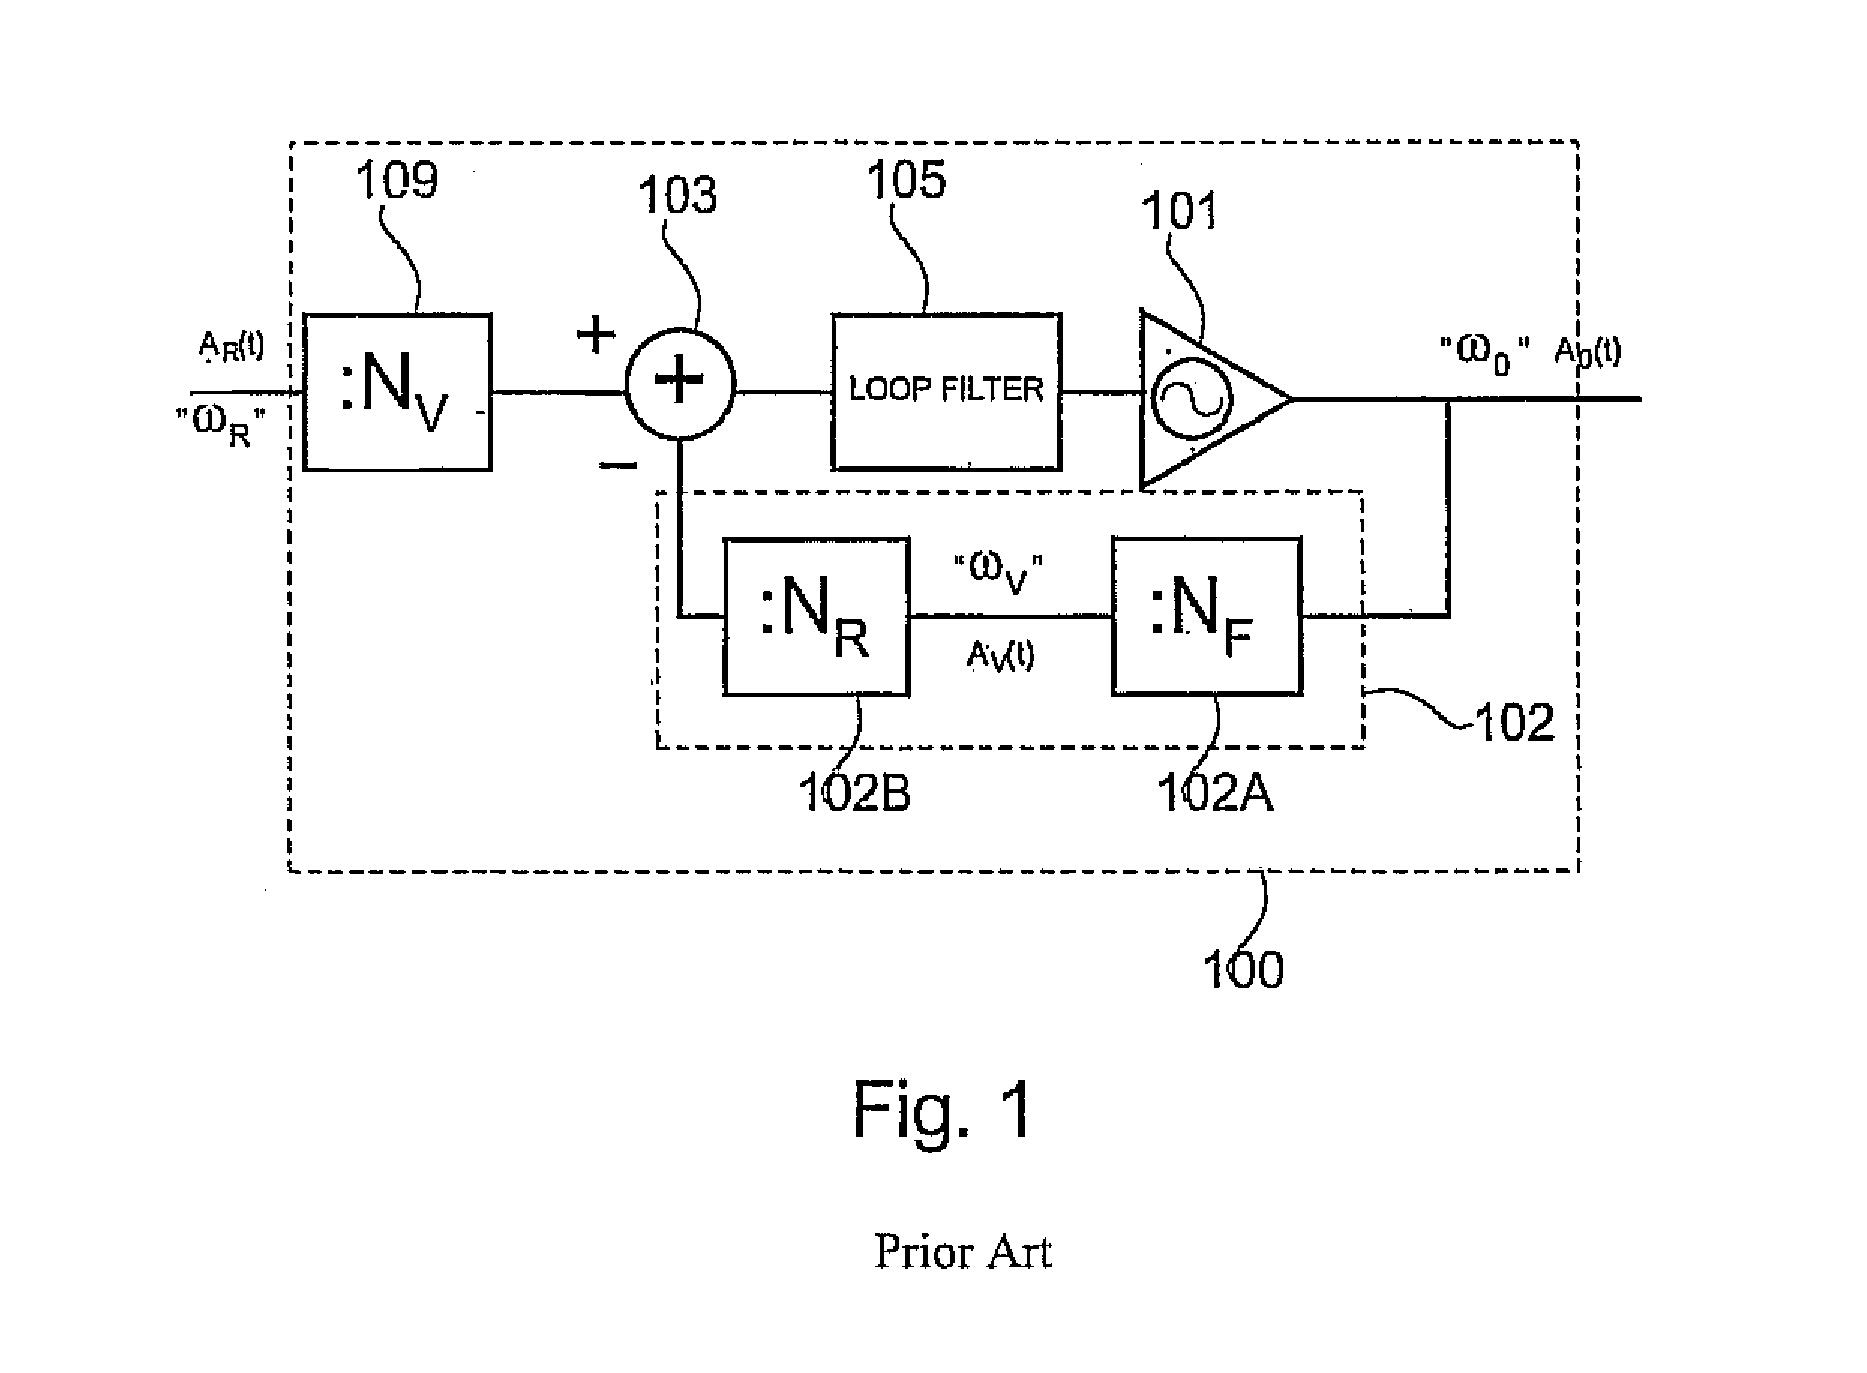 Phase-locked loop with incremental phase detectors and a converter for combining a logical operation with a digital to analog conversion